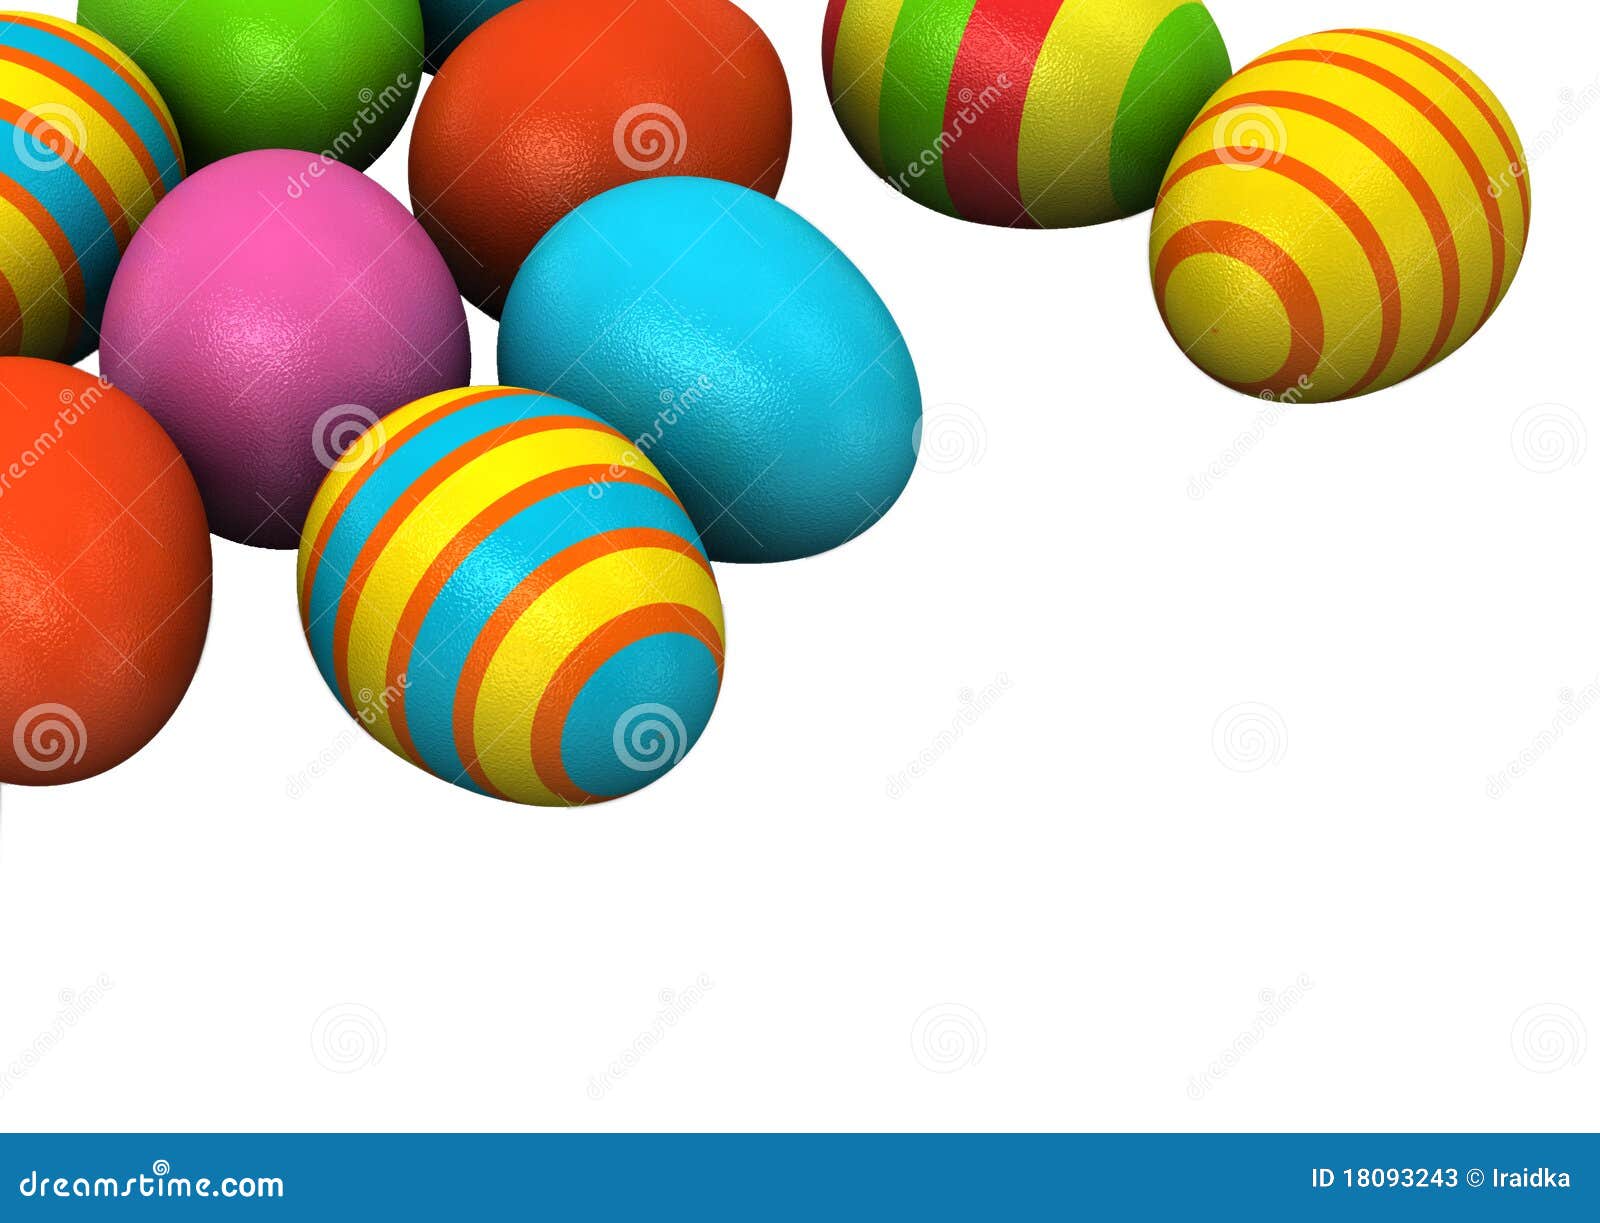 3d Colored Easter Eggs stock illustration. Illustration of oval - 18093243